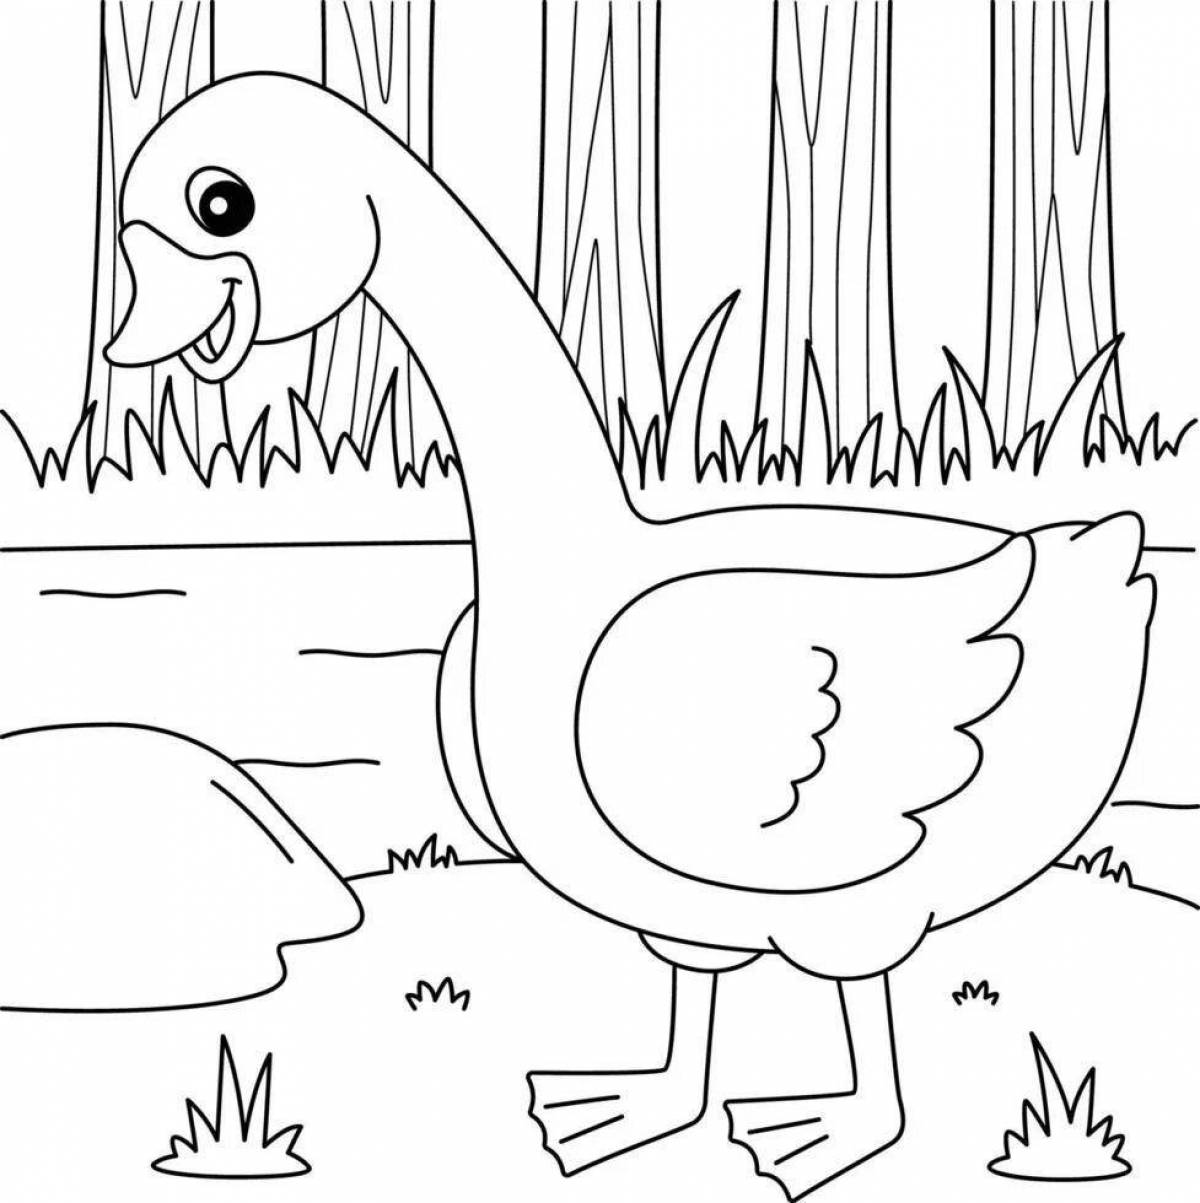 Amazing goose coloring page for 6-7 year olds